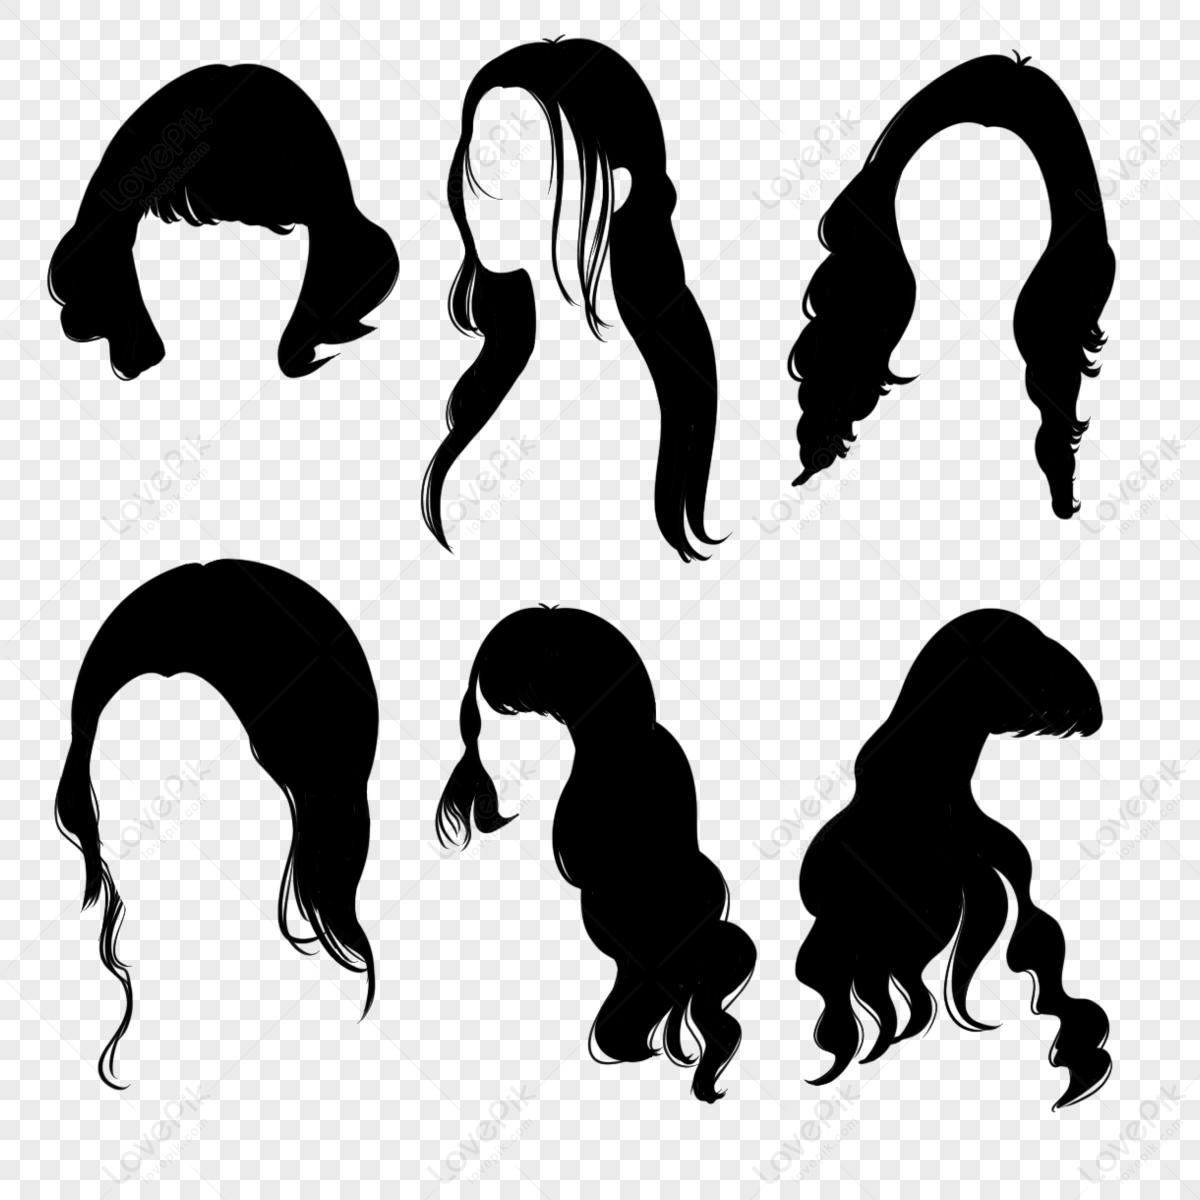 Unlimeted CB Hair Png Free Download || Png Kaise Download Kare || CB Png  Kaise Download kare || #cb - YouTube